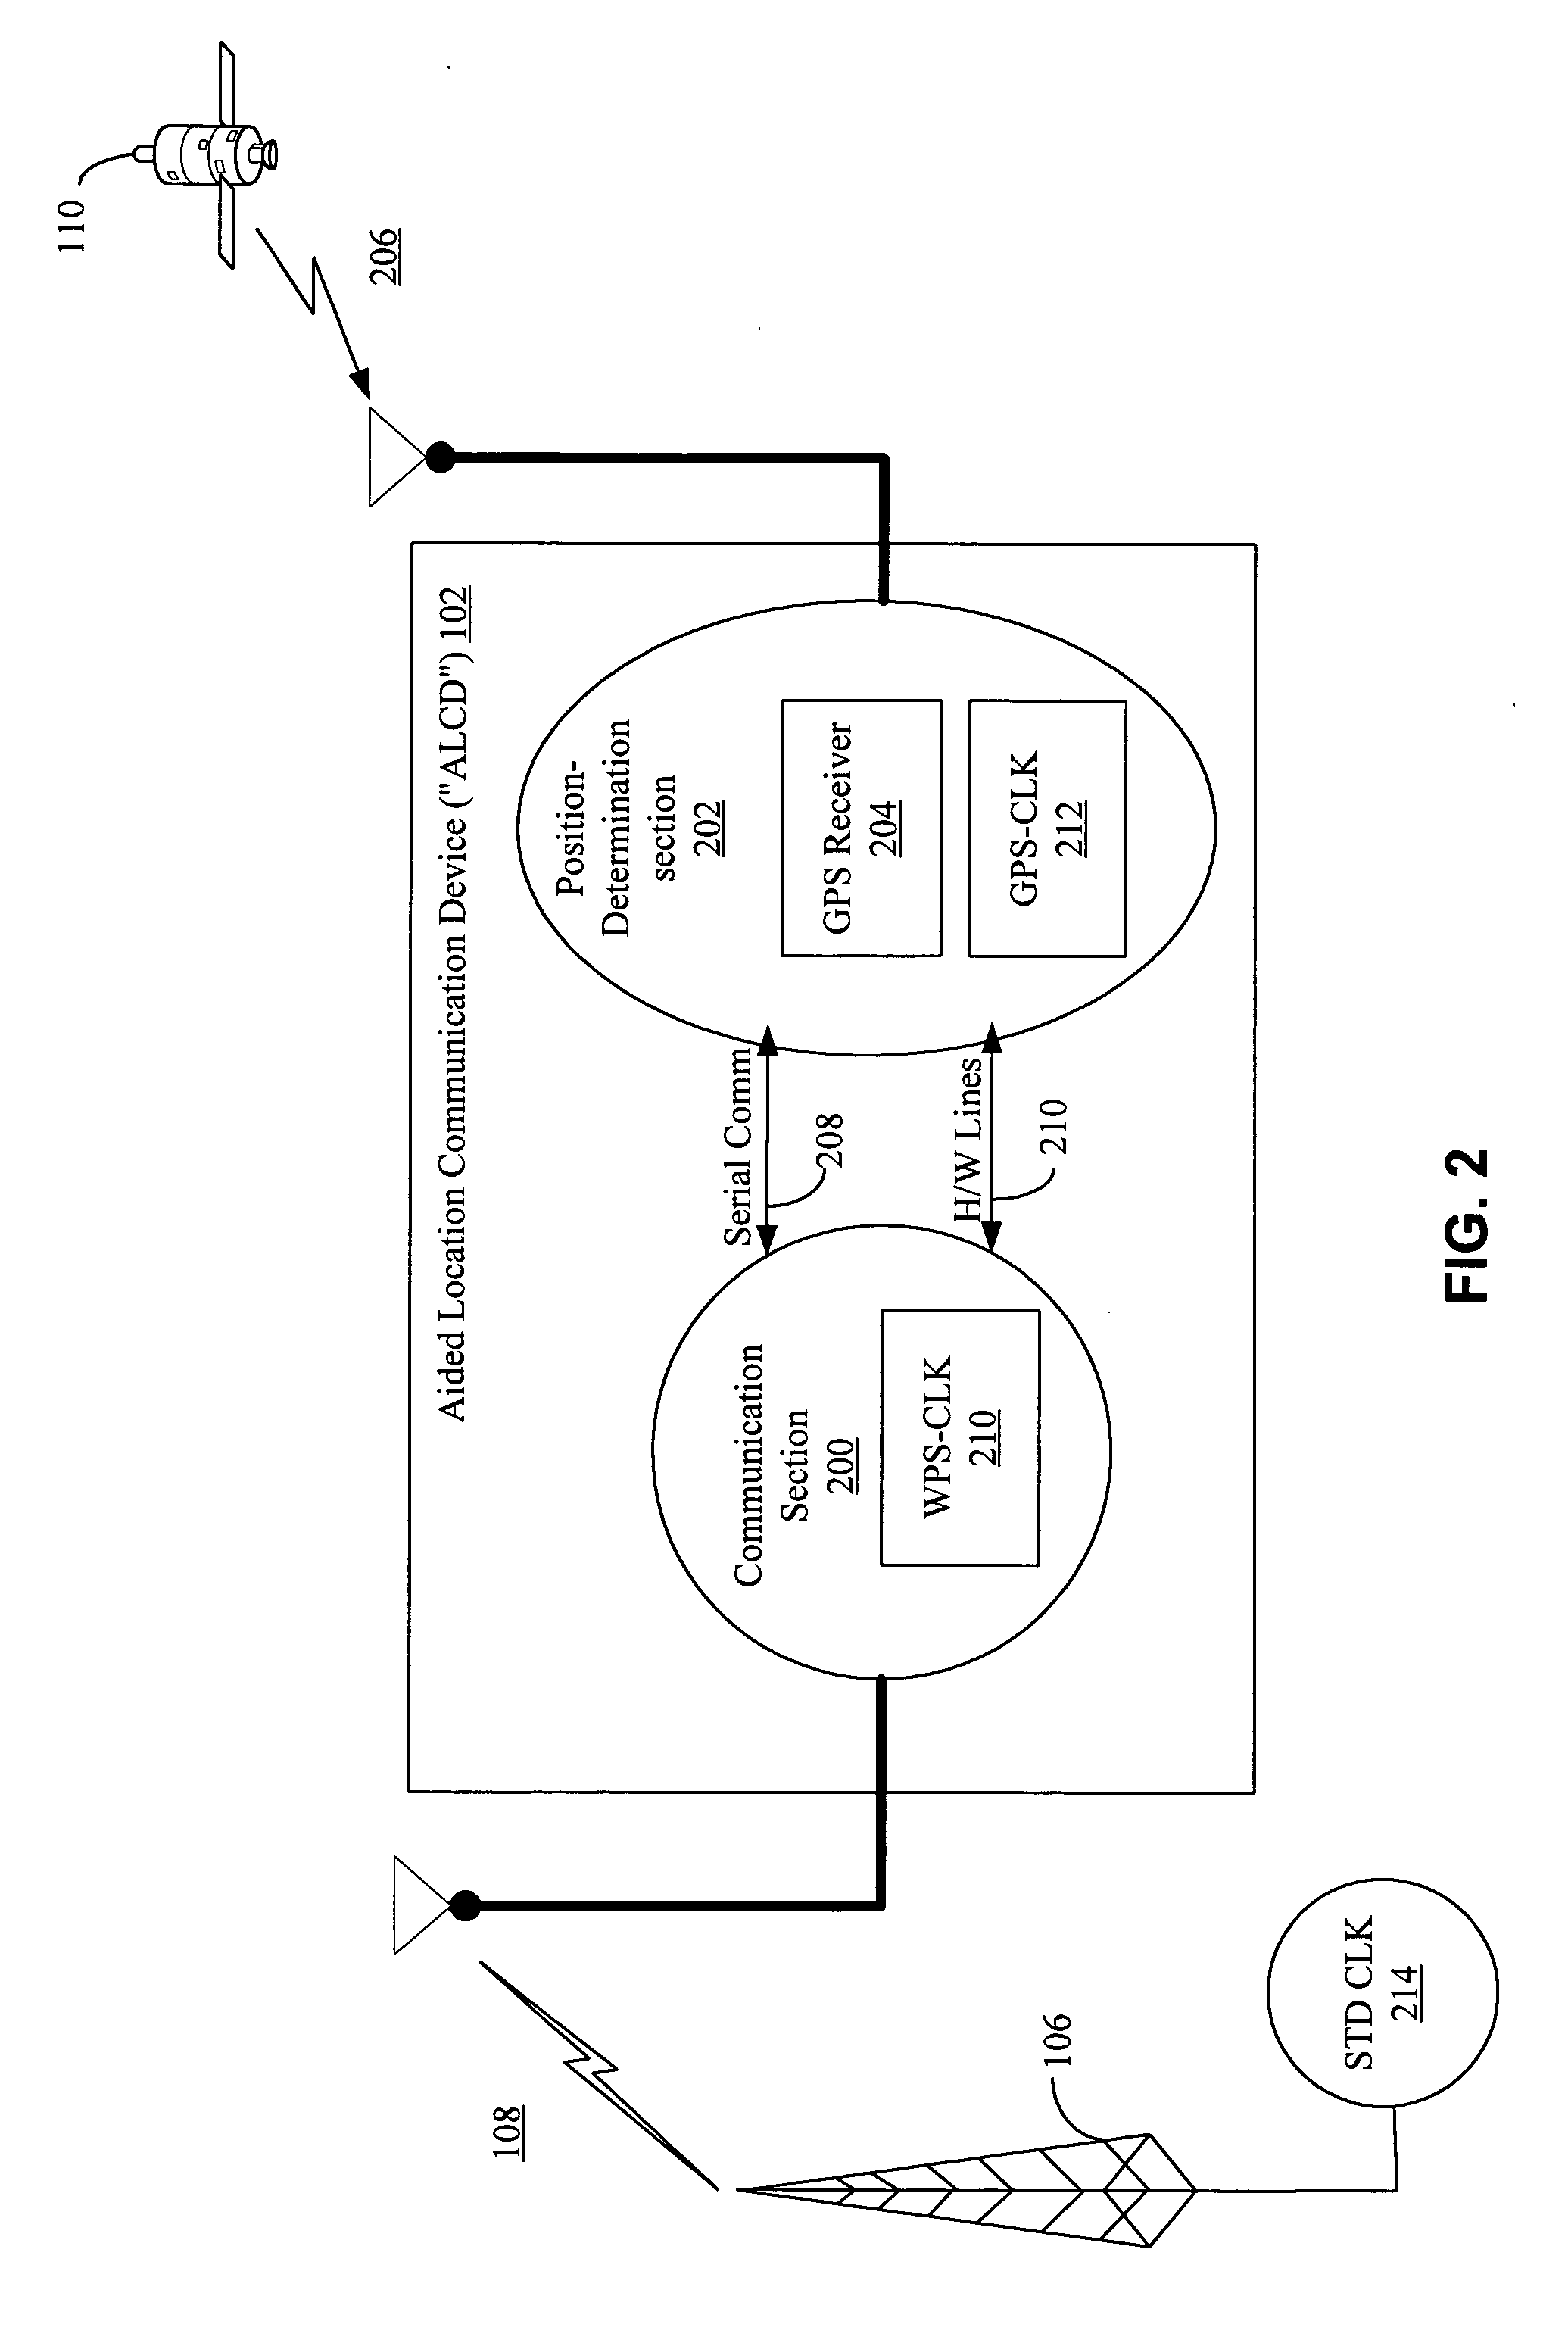 Frequency phase correction system